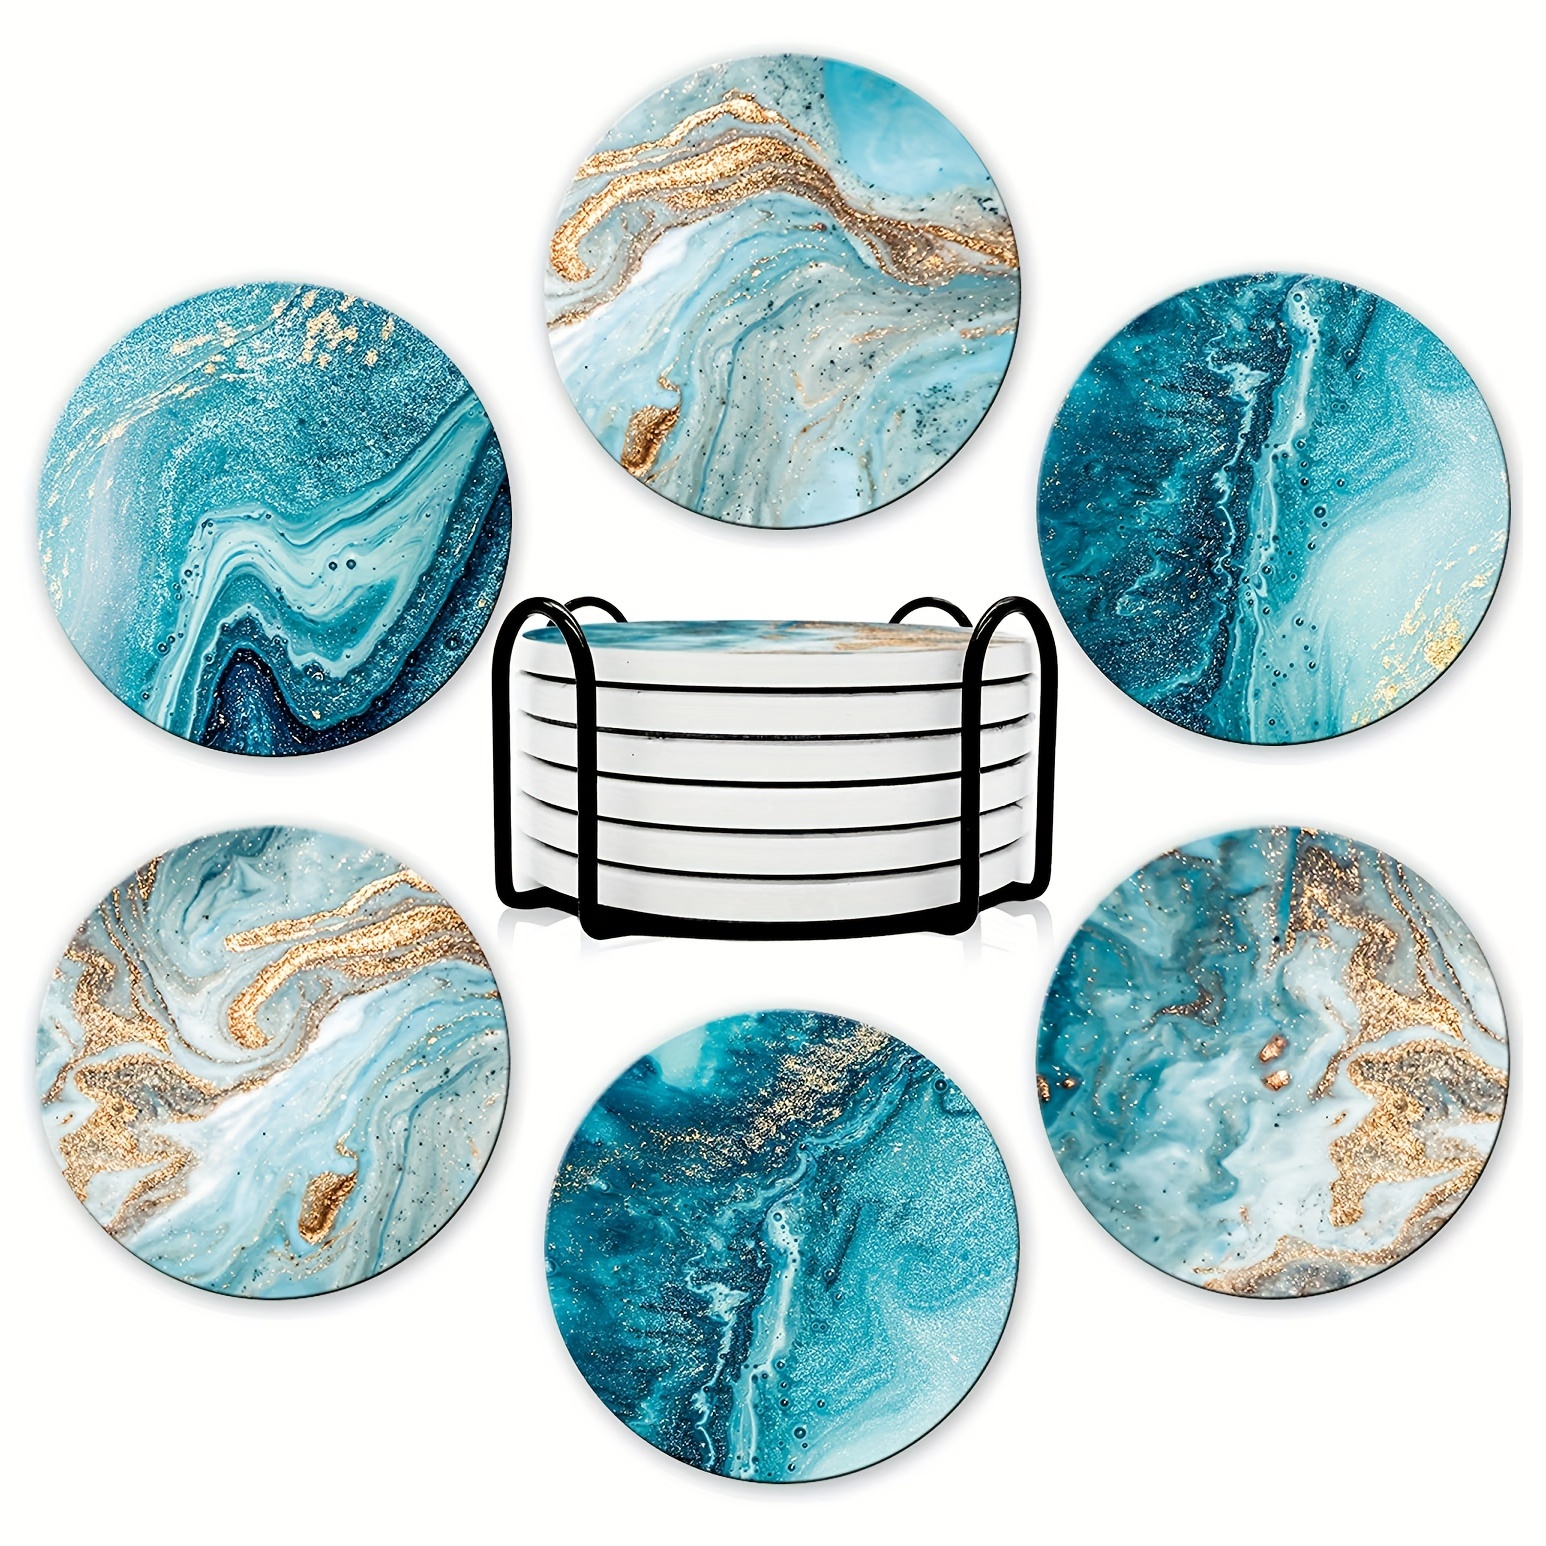 

6pcs Ceramic Coaster With Holder, Cork Protective Furniture, Restaurant Decoration, Coffee Table Decorations, Heat Resistant, Blue Mat, Ocean Style, Housewarming Gift